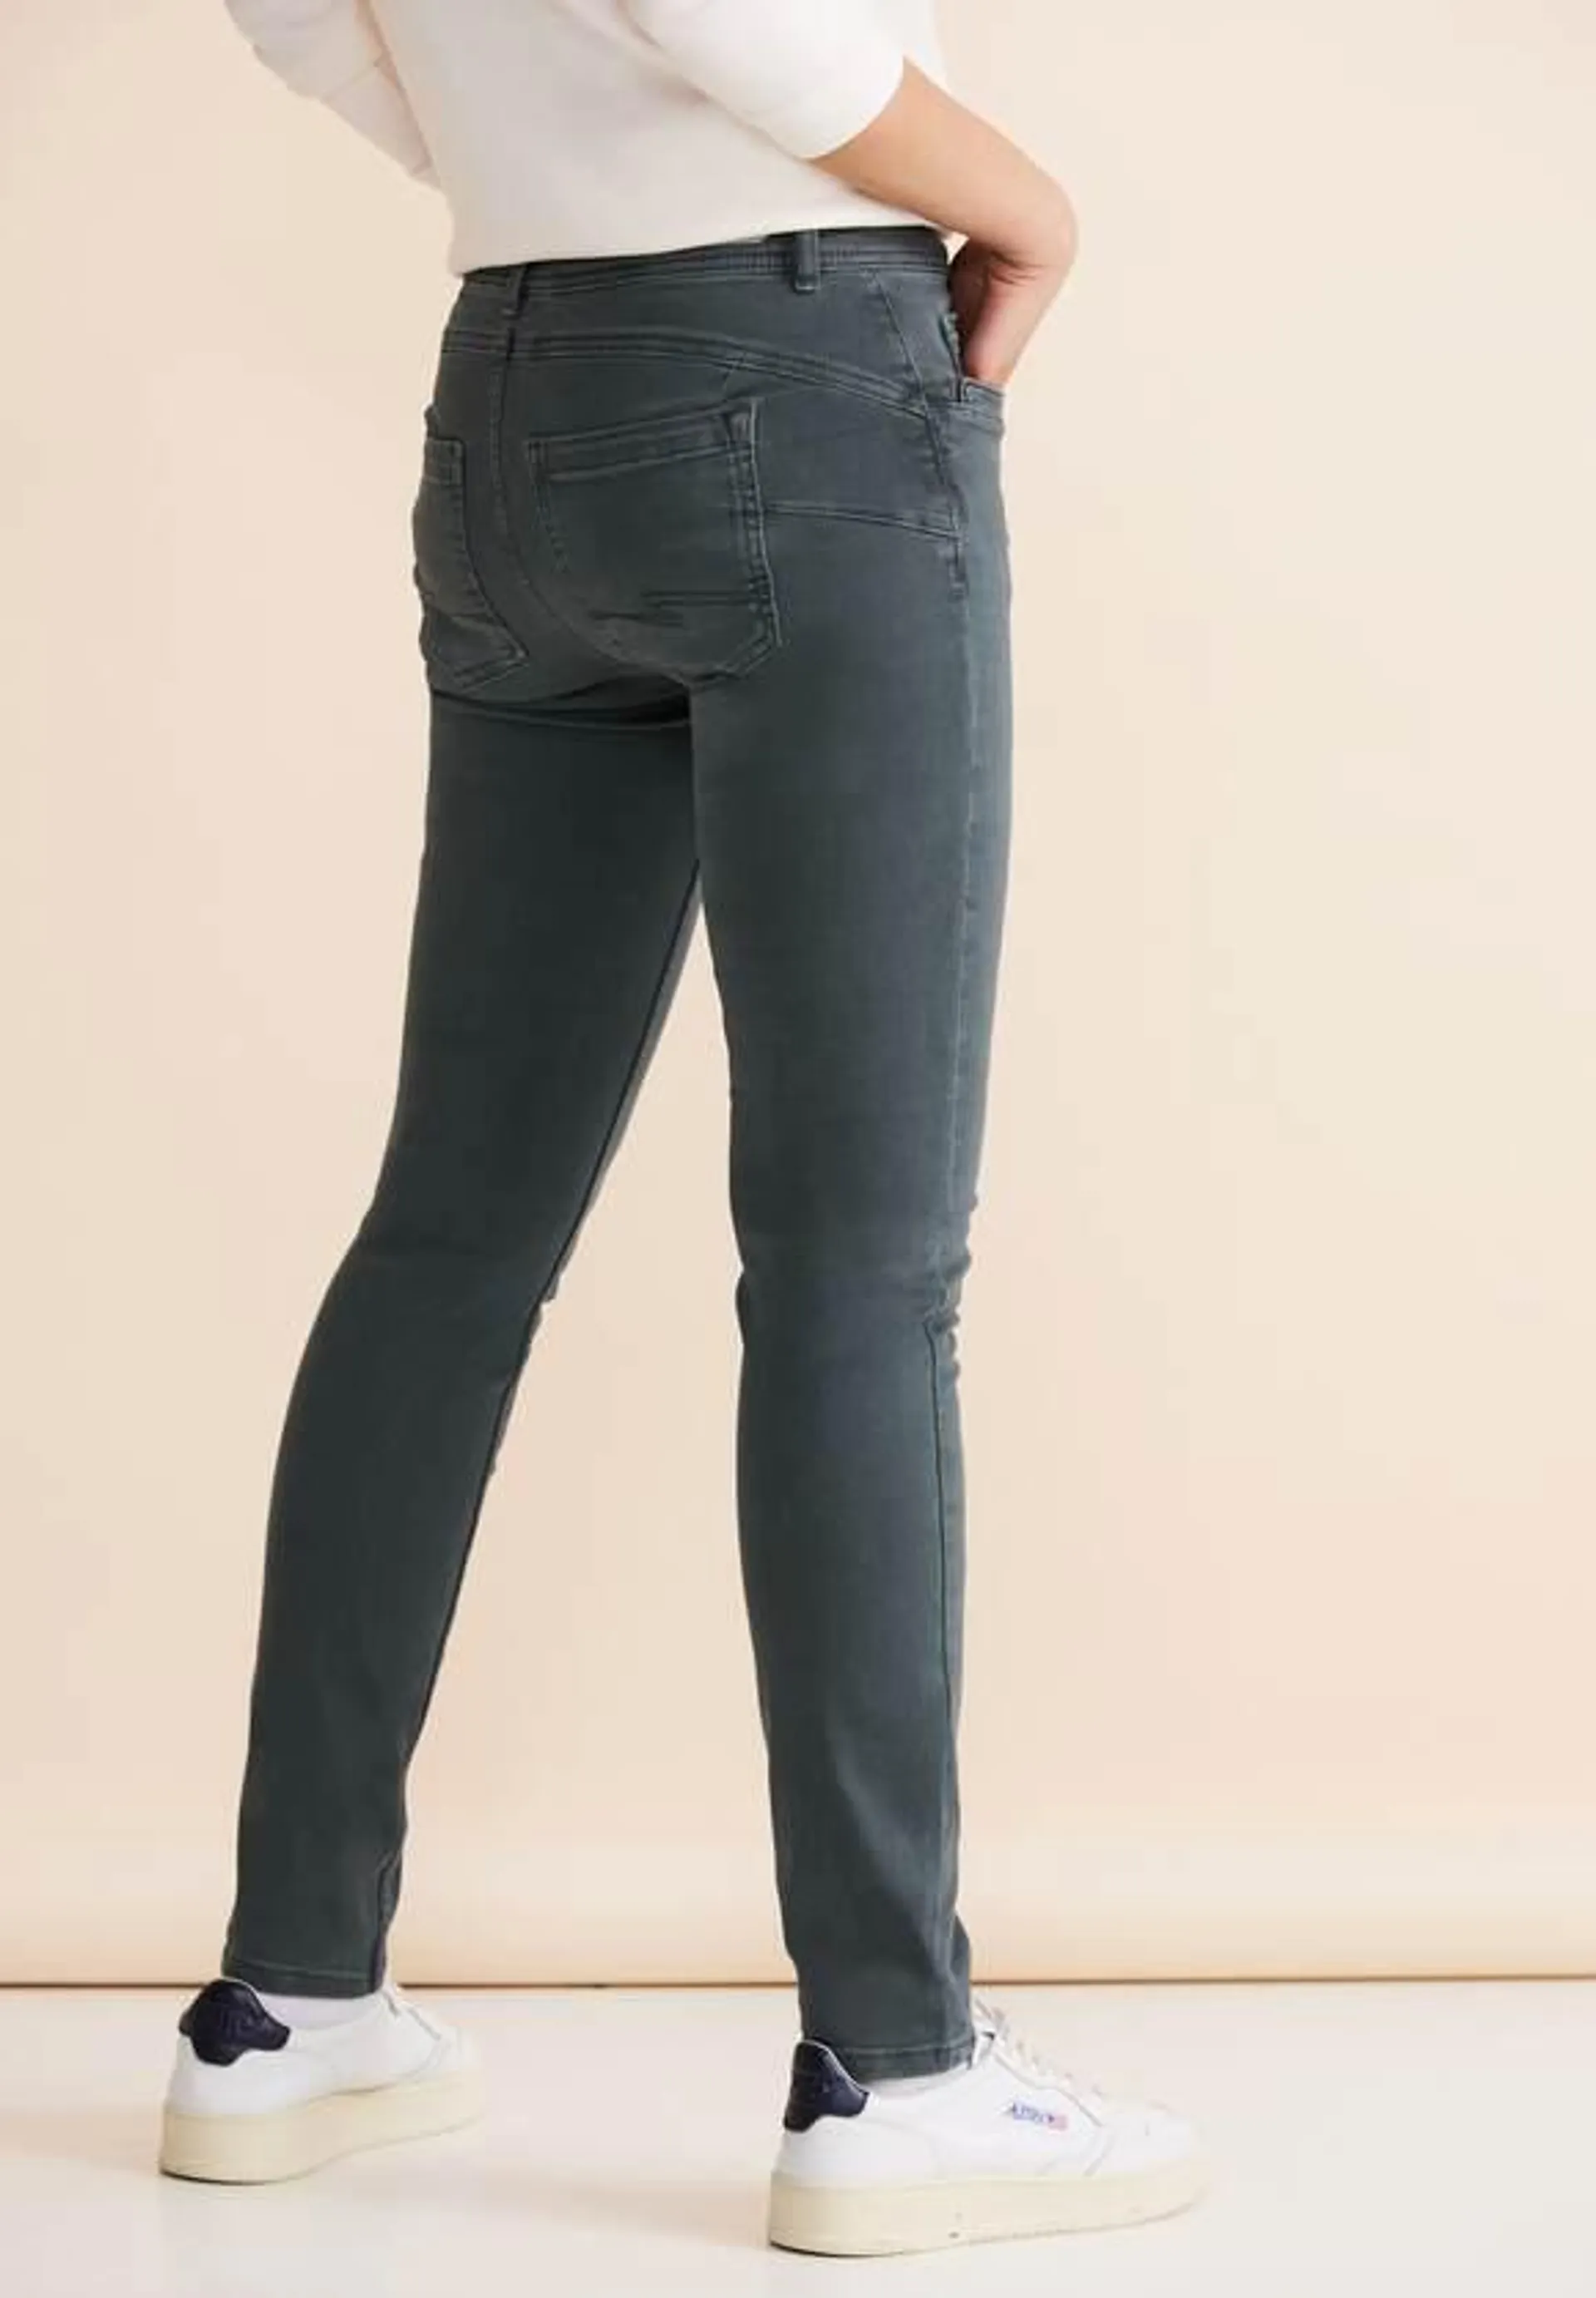 Free-to-move jeans